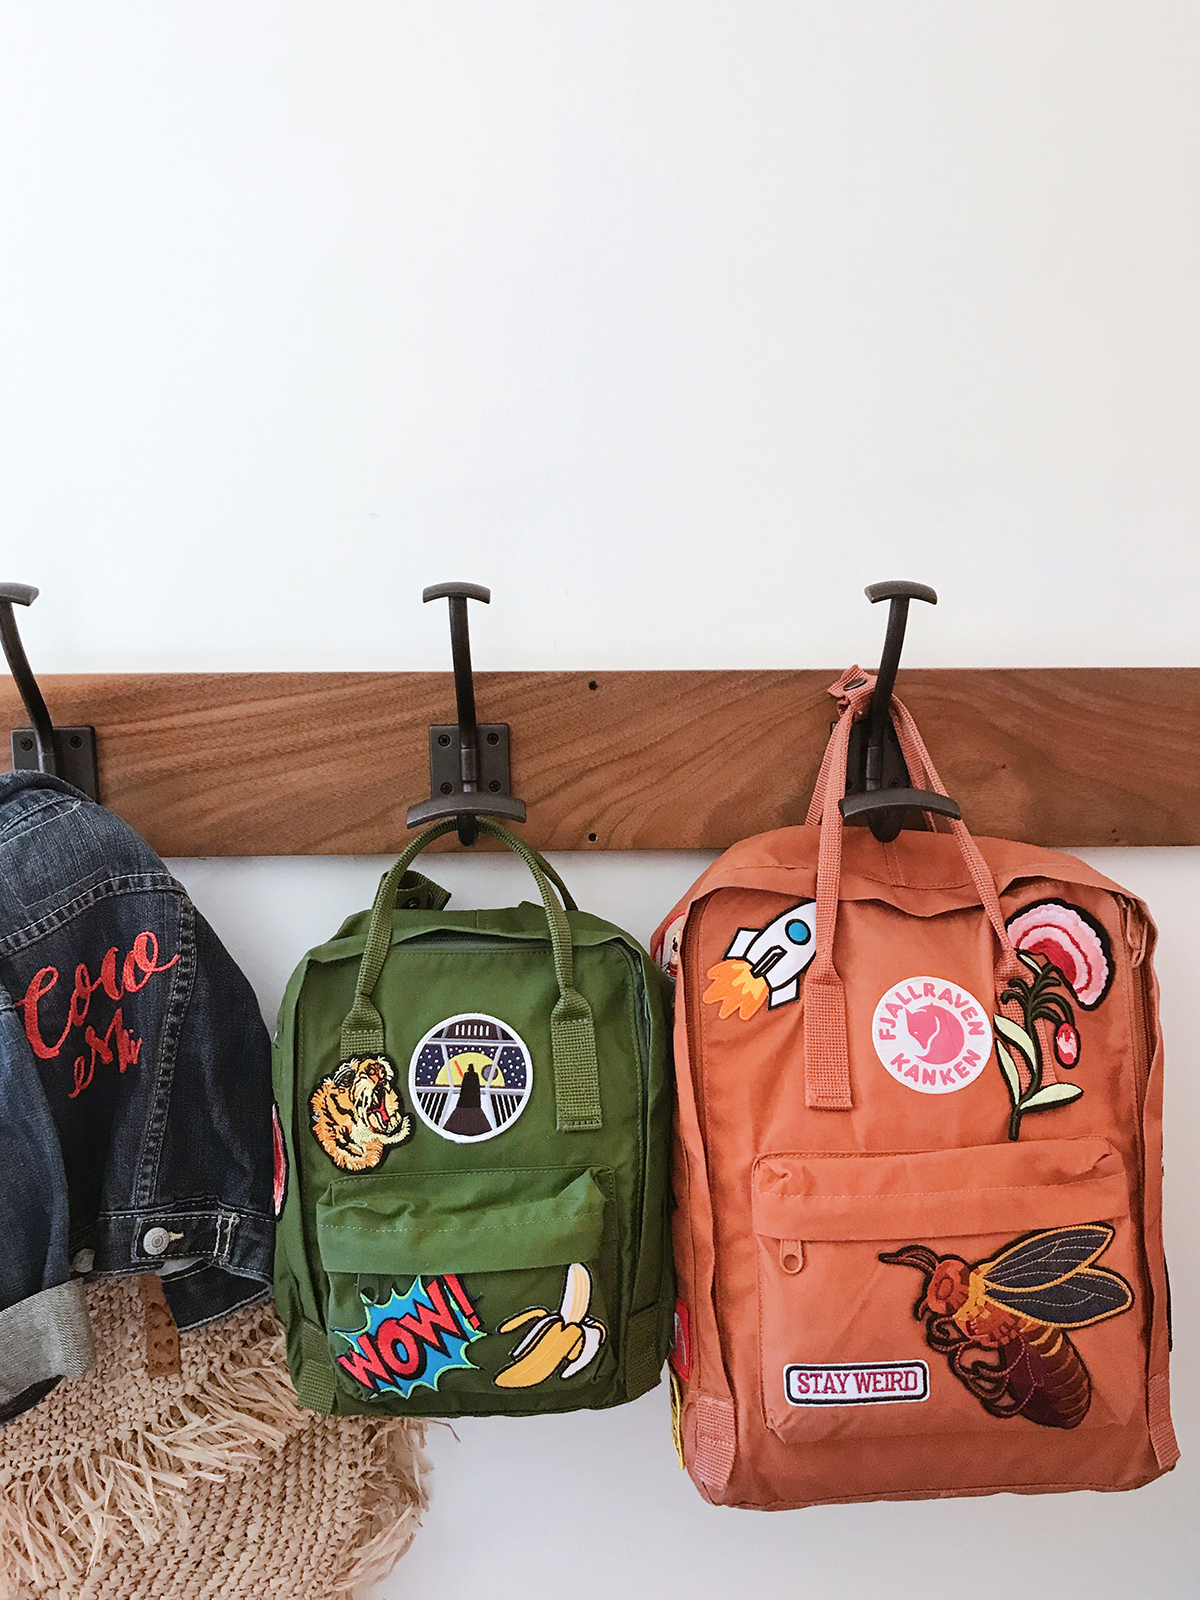 mat The sky erection Kids Patches + DIY Backpack - Honestly WTF